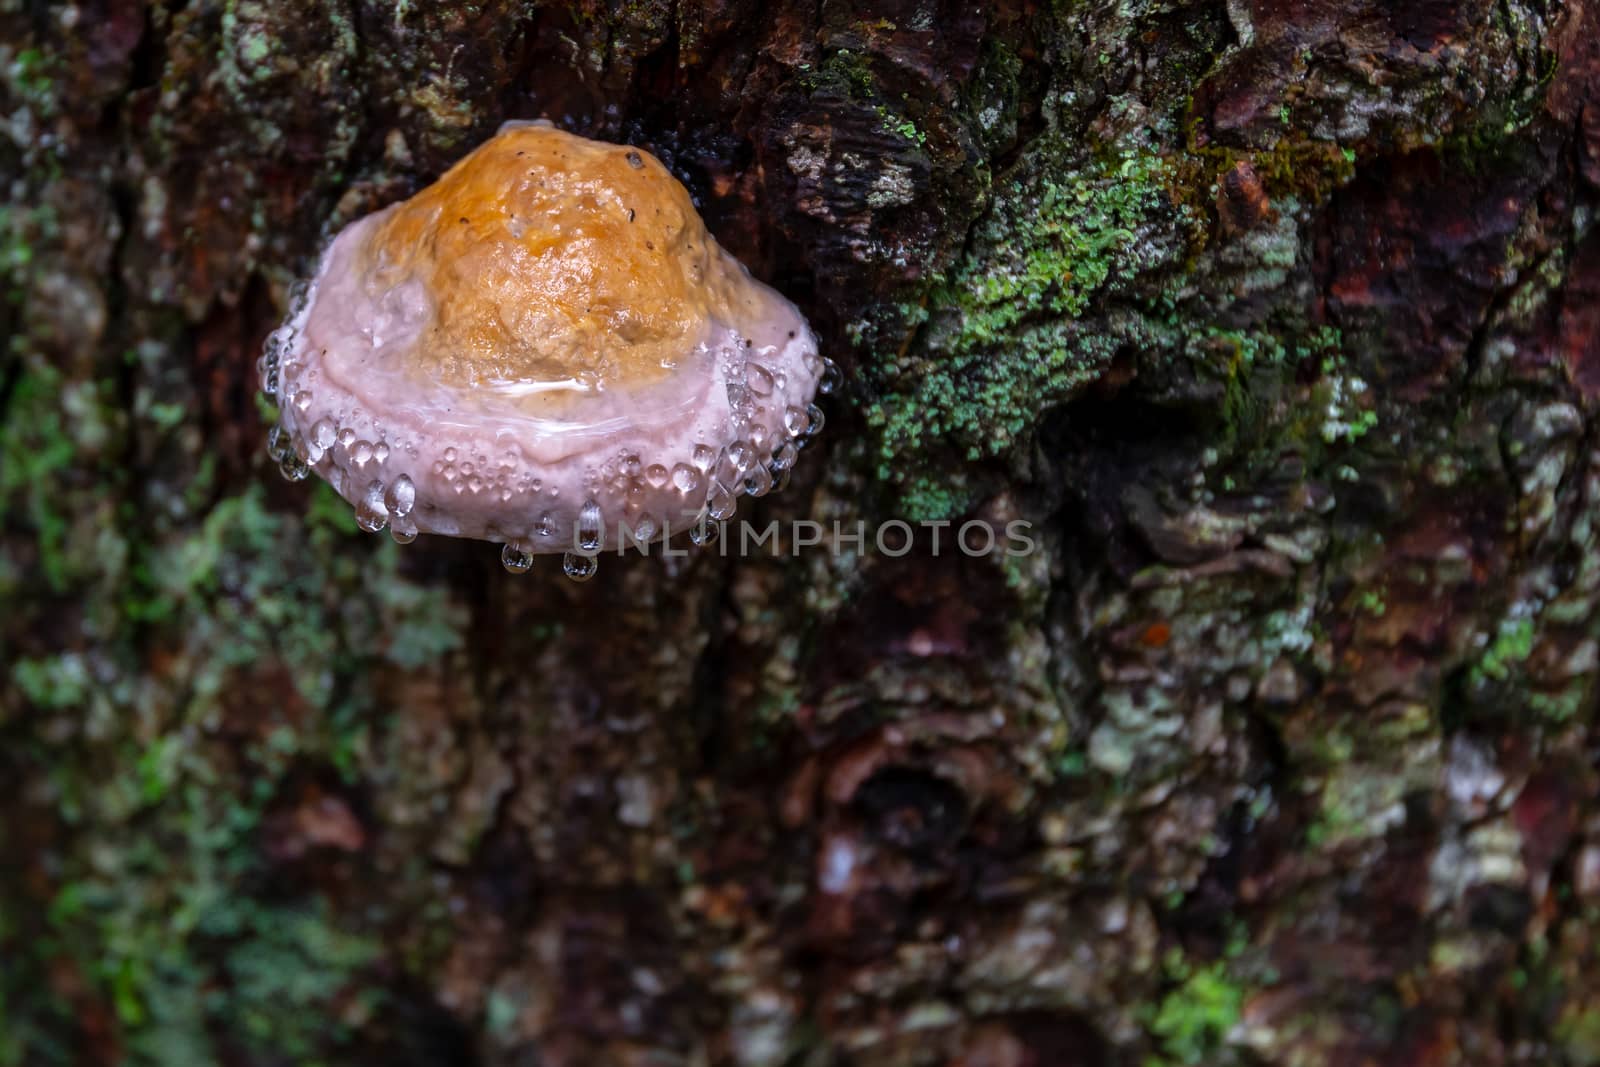 Mushroom on tree with dew drops, bark covered with green moss by asafaric